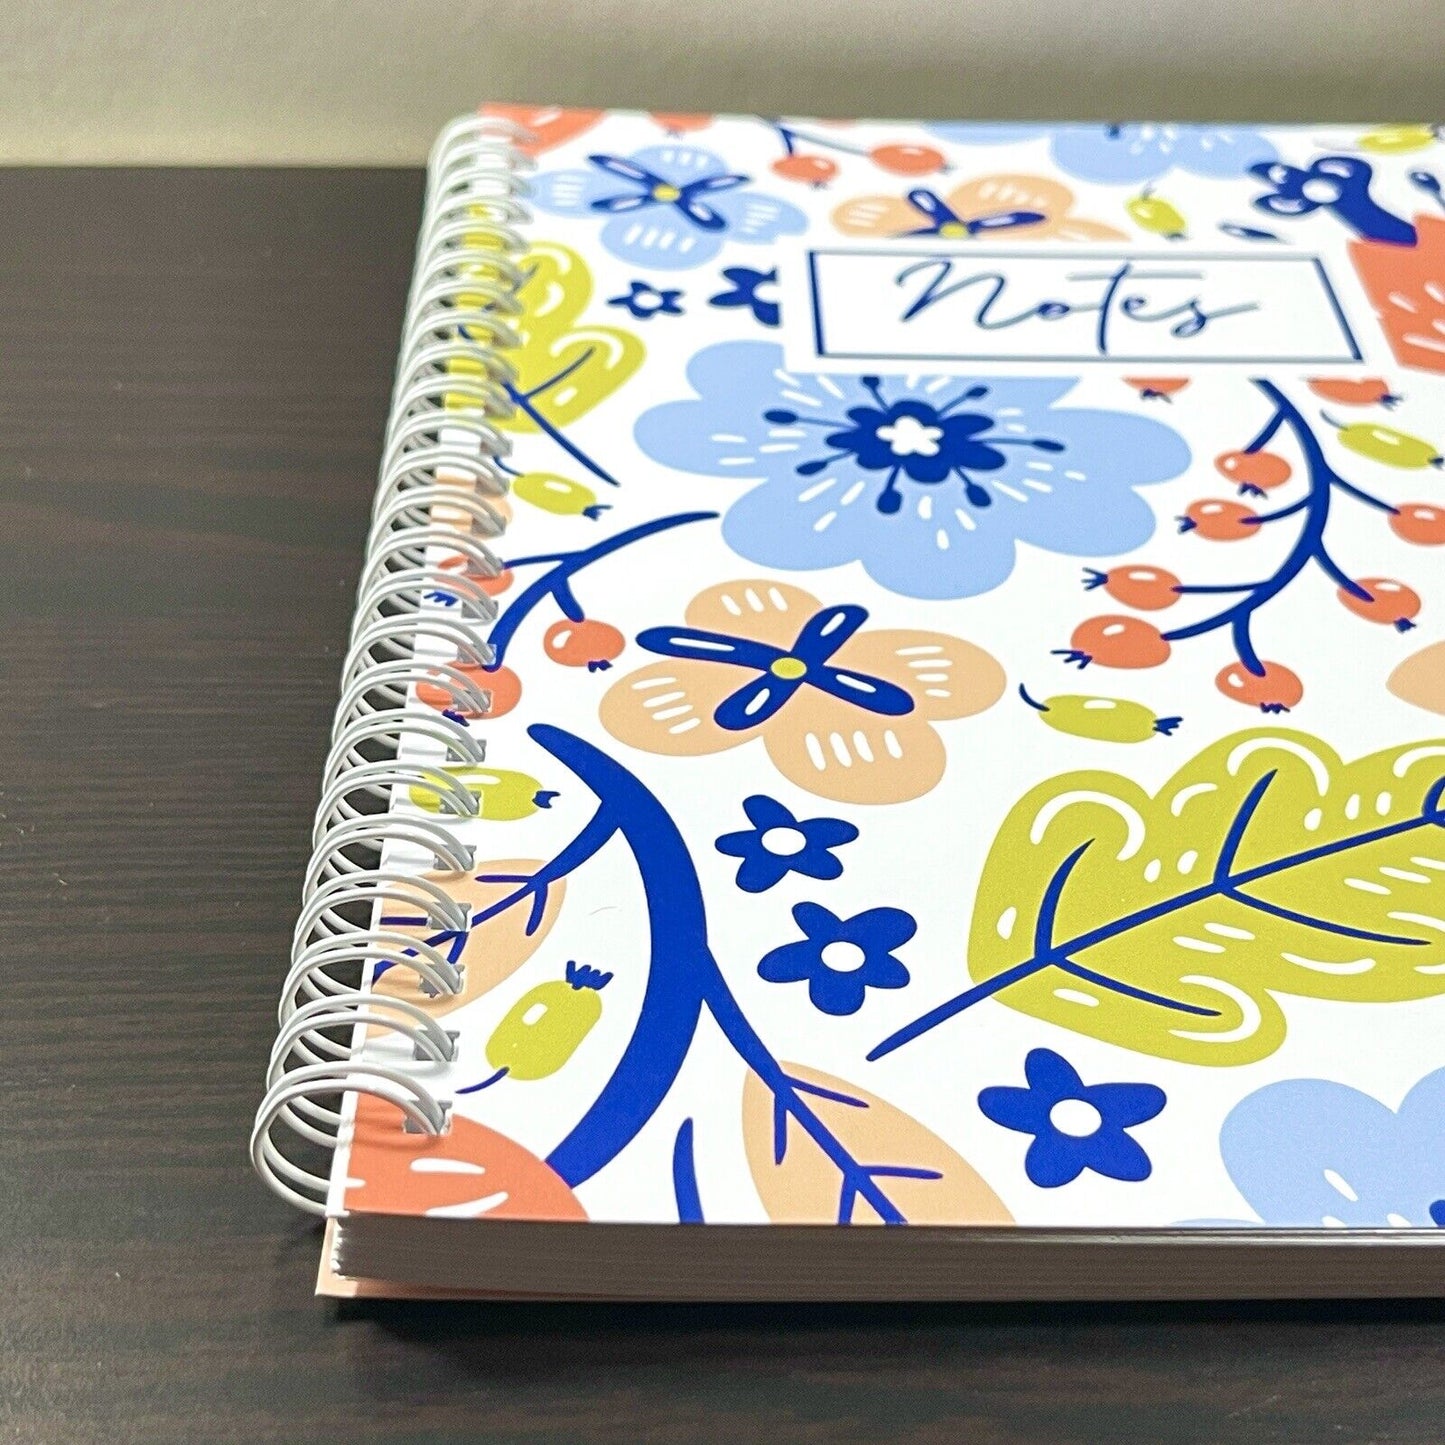 Floral Spiral Bound 6x8.5 Notebook Lined Journal Office Supplies 120 pages